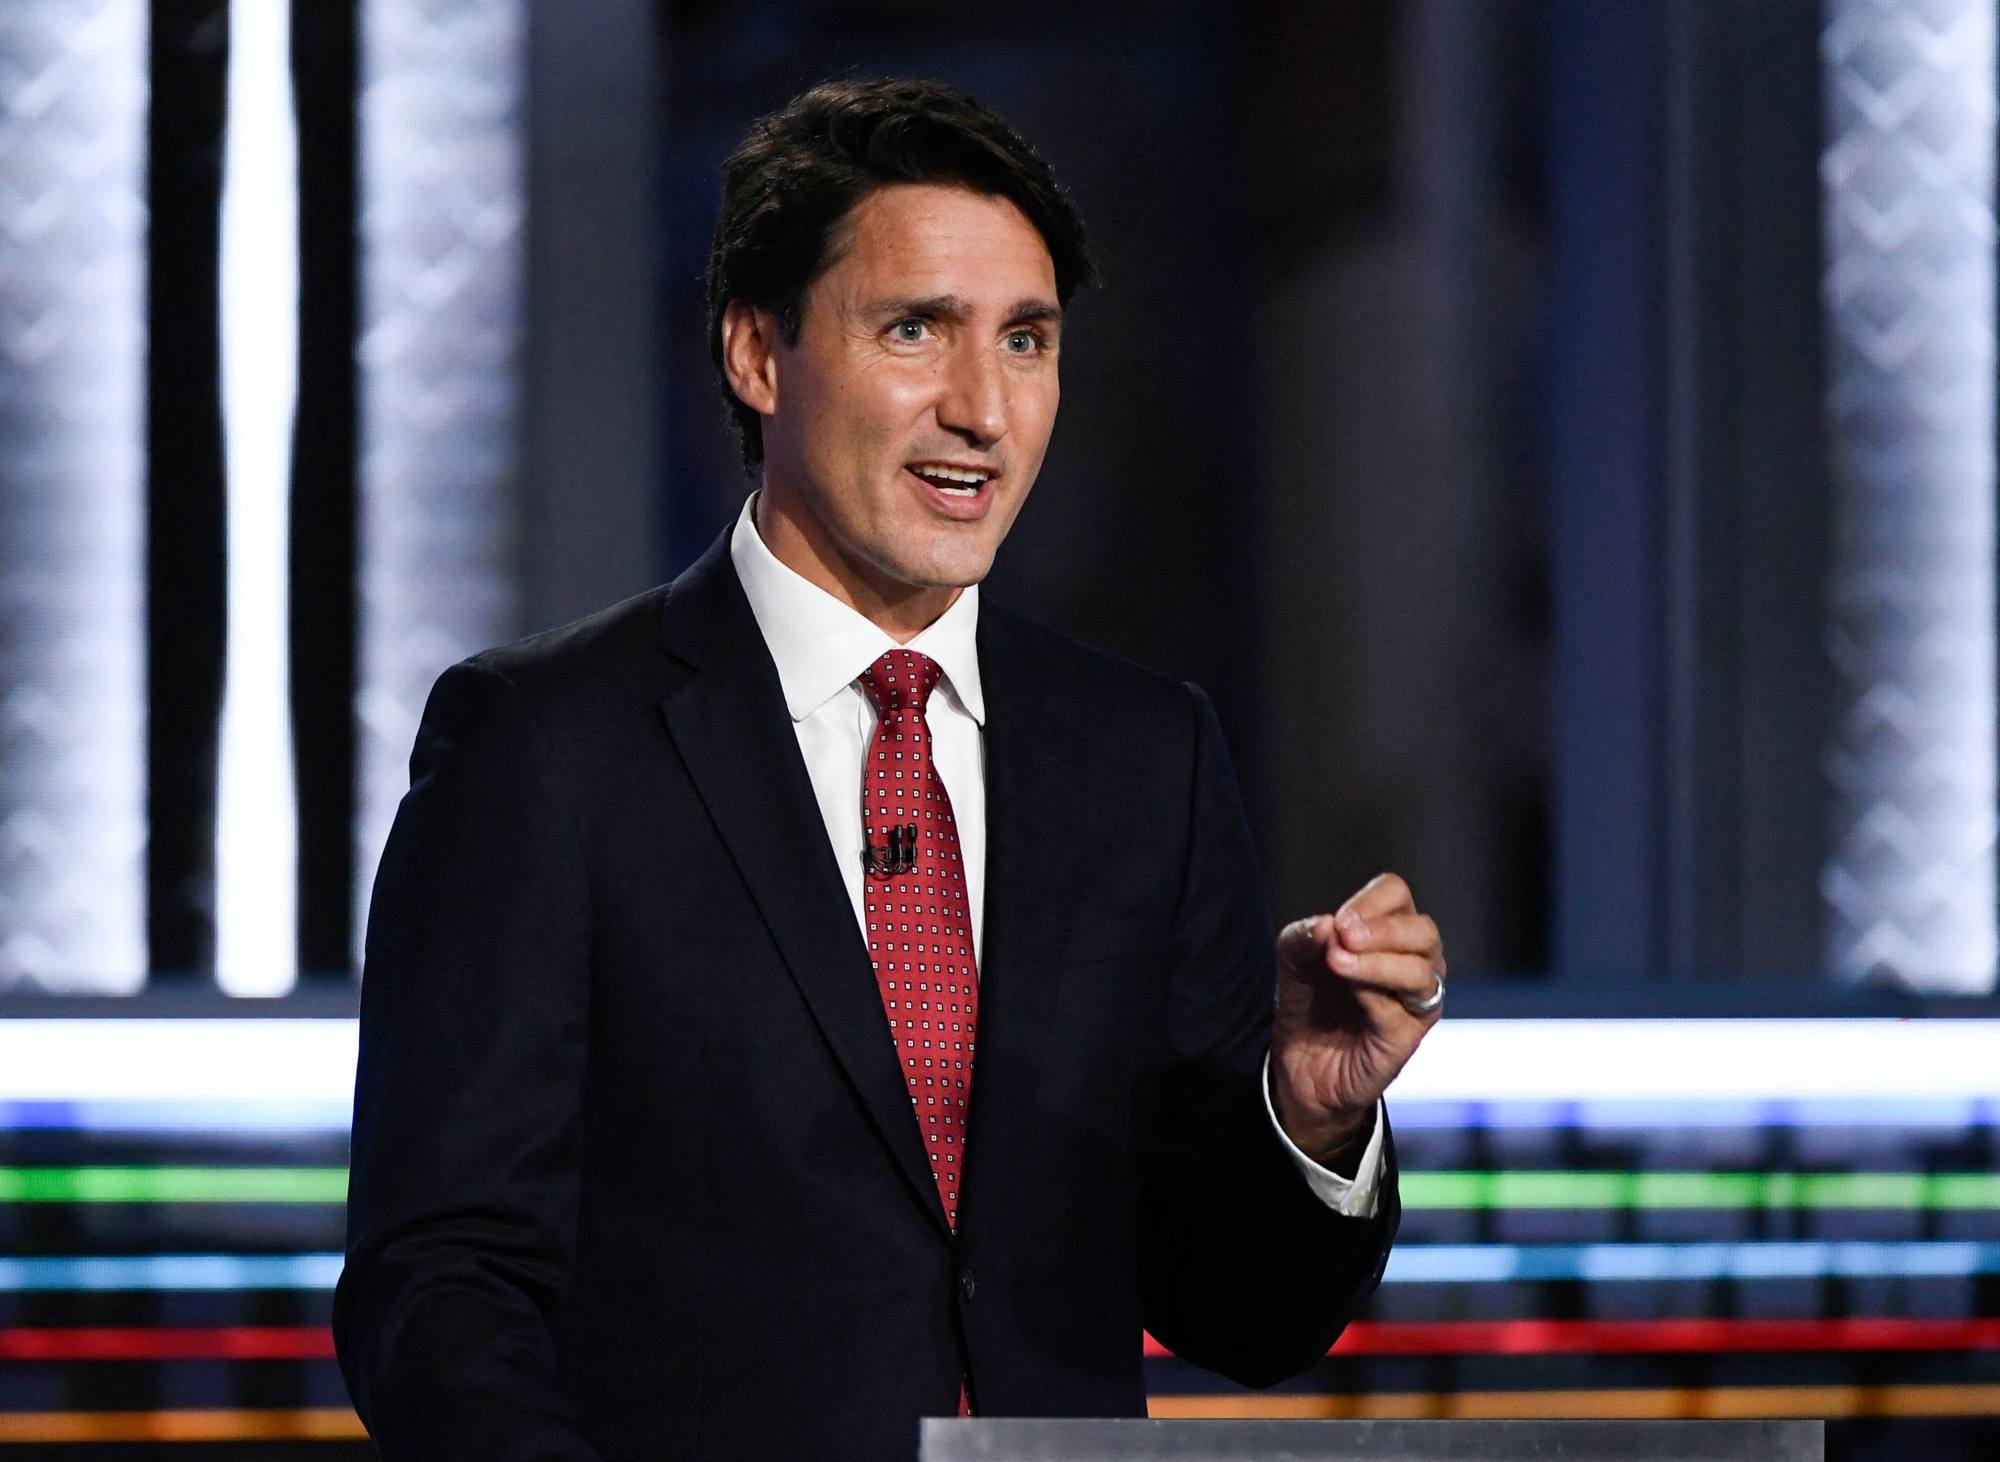 Canadian Prime Minister and Liberal Leader Justin Trudeau has got into hot water in the past for his lavish spending on trips outside Canada. Photo: AFP